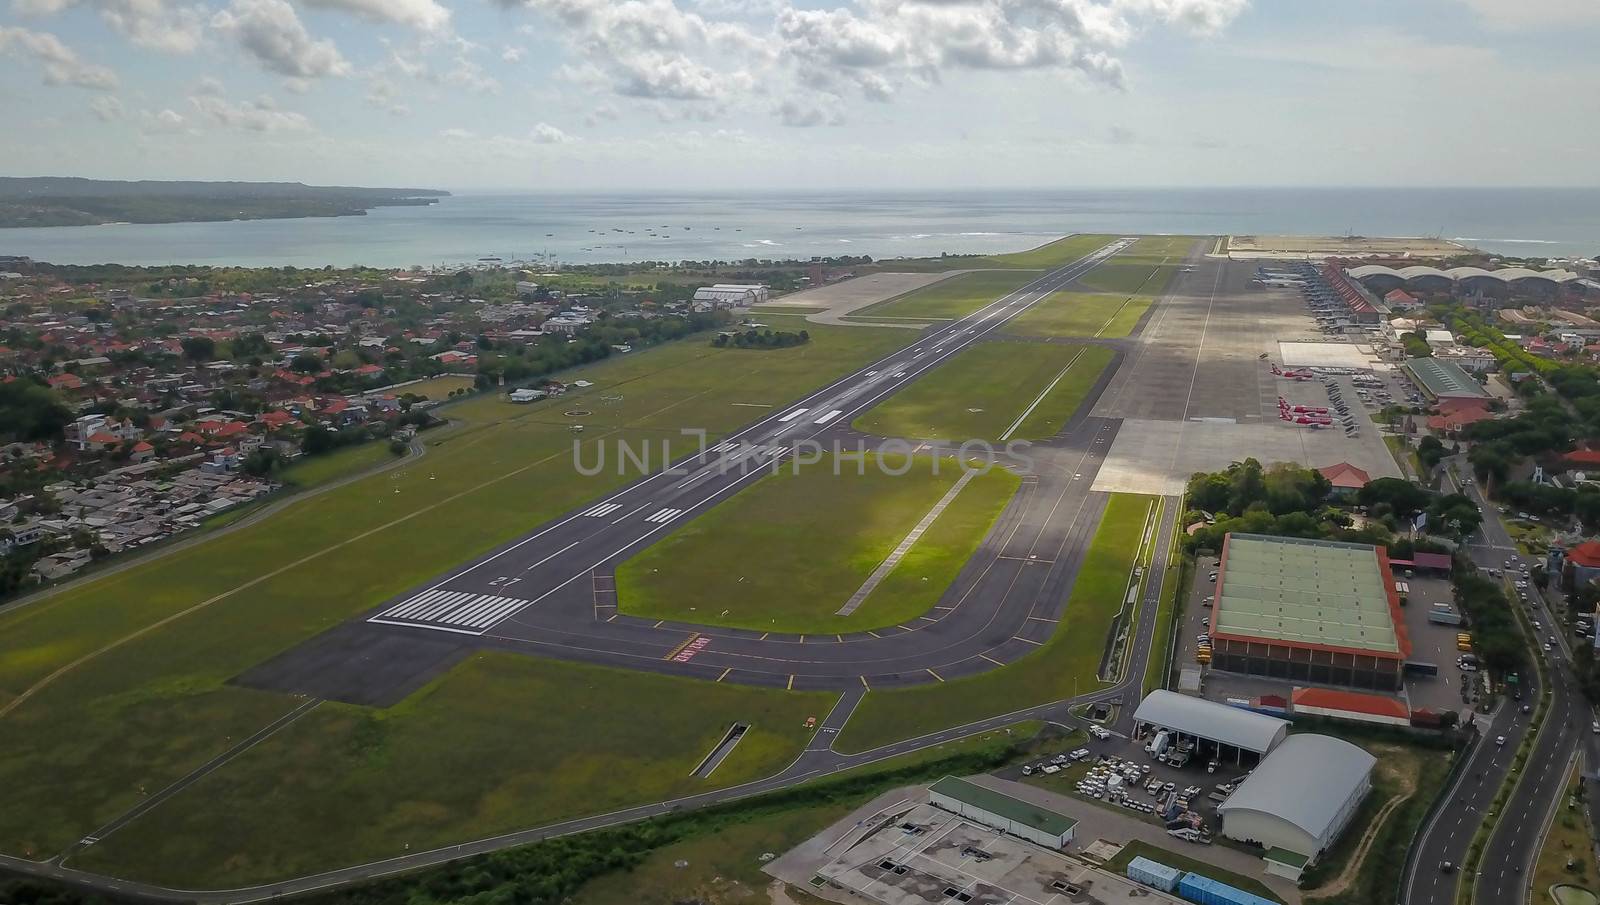 A view of Bali island after aircraft has been taken off from Ngurah Rai International airport. Runway reaching into the ocean. Aerial view to international airport in Denpasar.